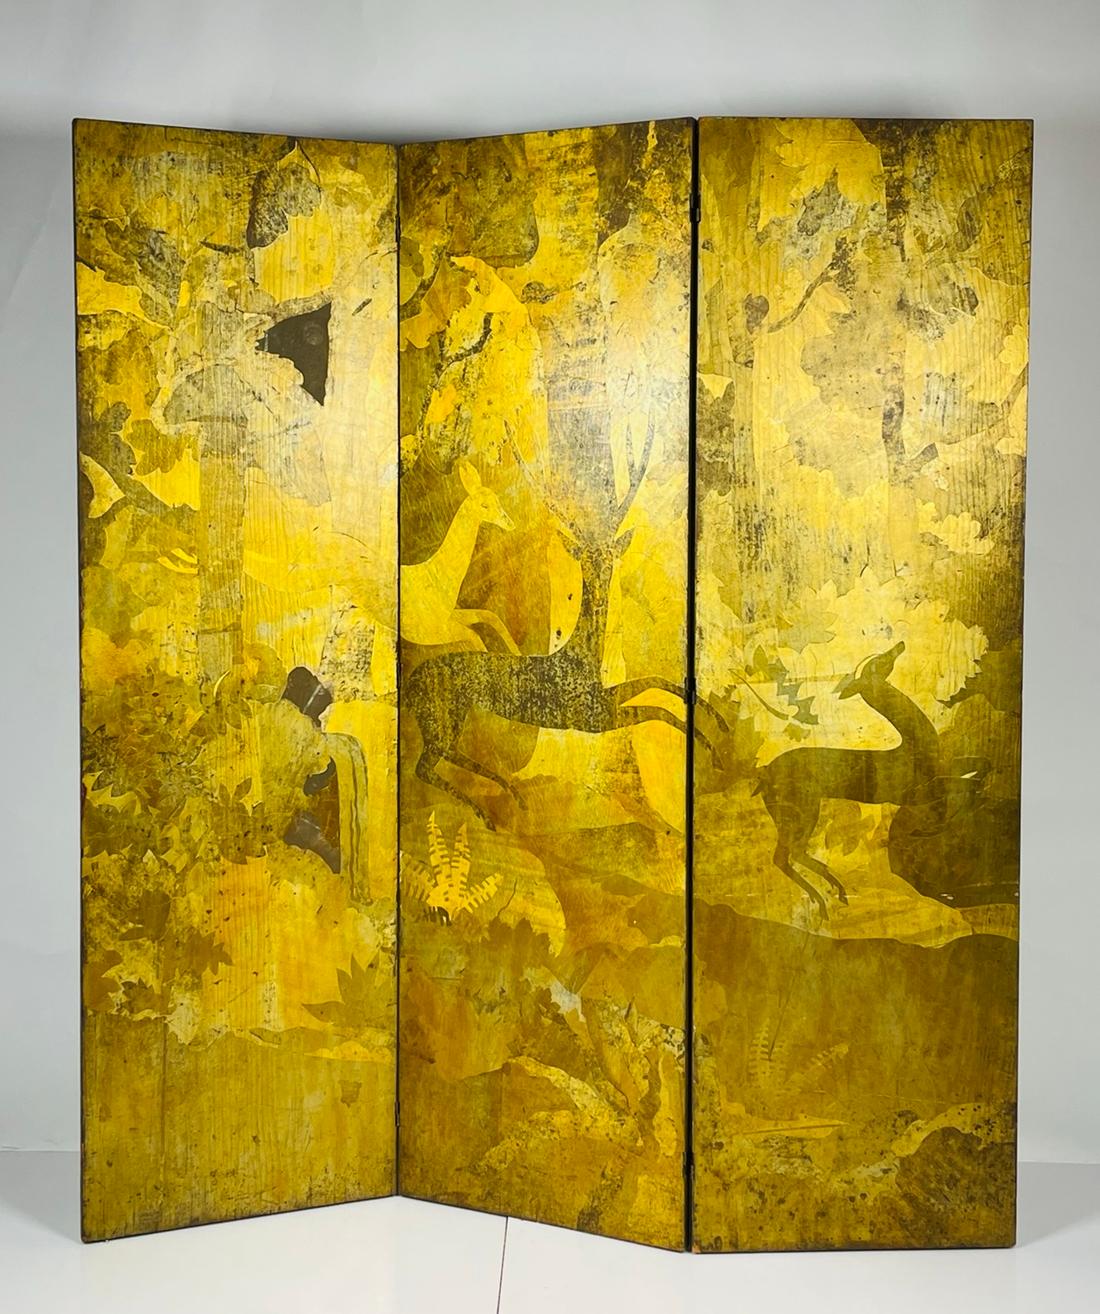 Vintage folding screen/room divider dating for the 1950s or earlier.
The piece is covered in gold leaf, the gold leaf depicts male and female deers.
The male deer have long horns, they seem to be roaming on a forest, the are trees and large